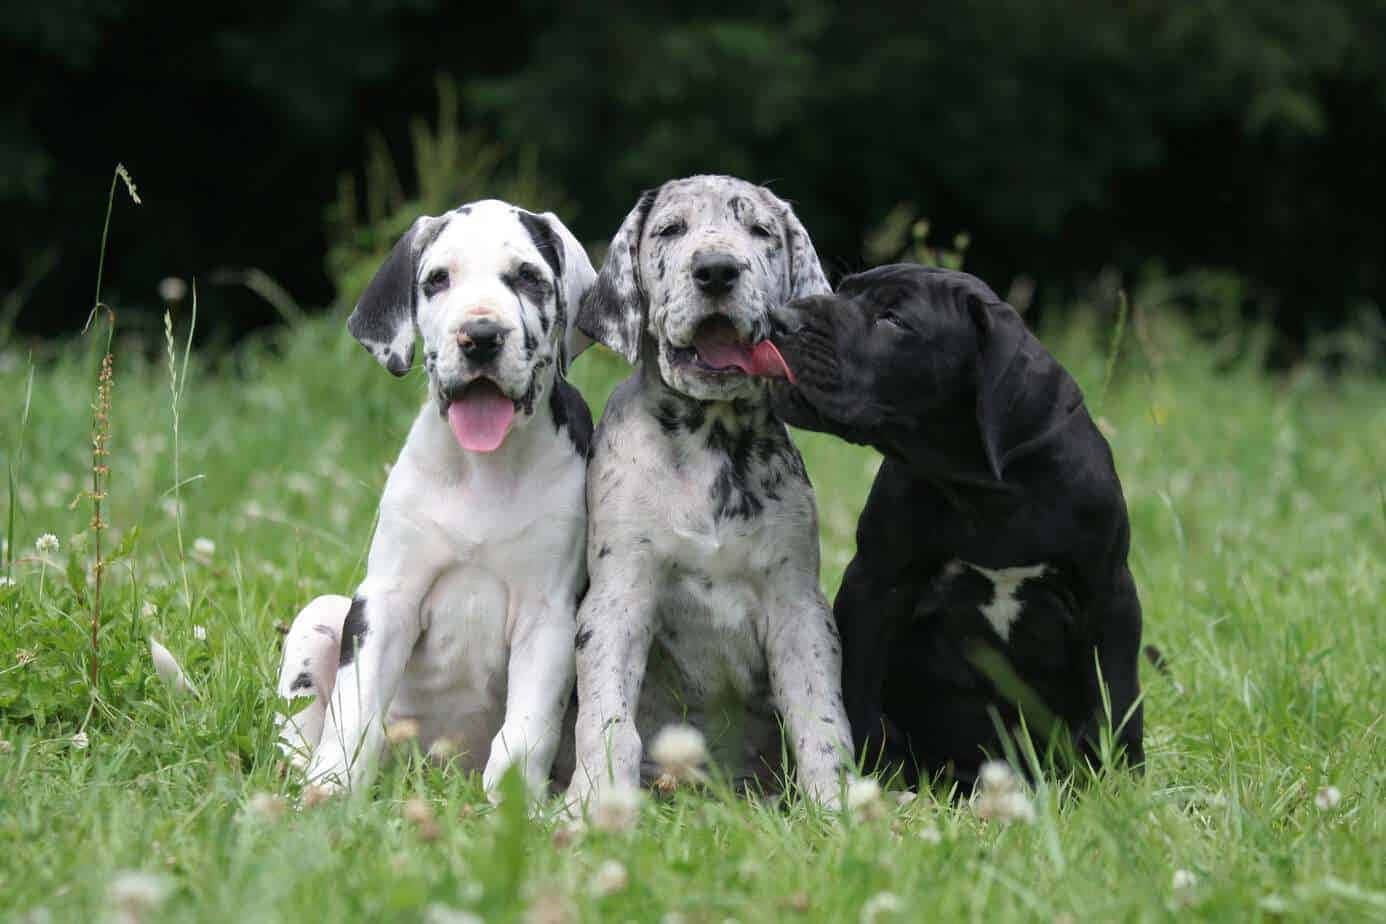 Adorable Great Dane Puppies Looking for a Home